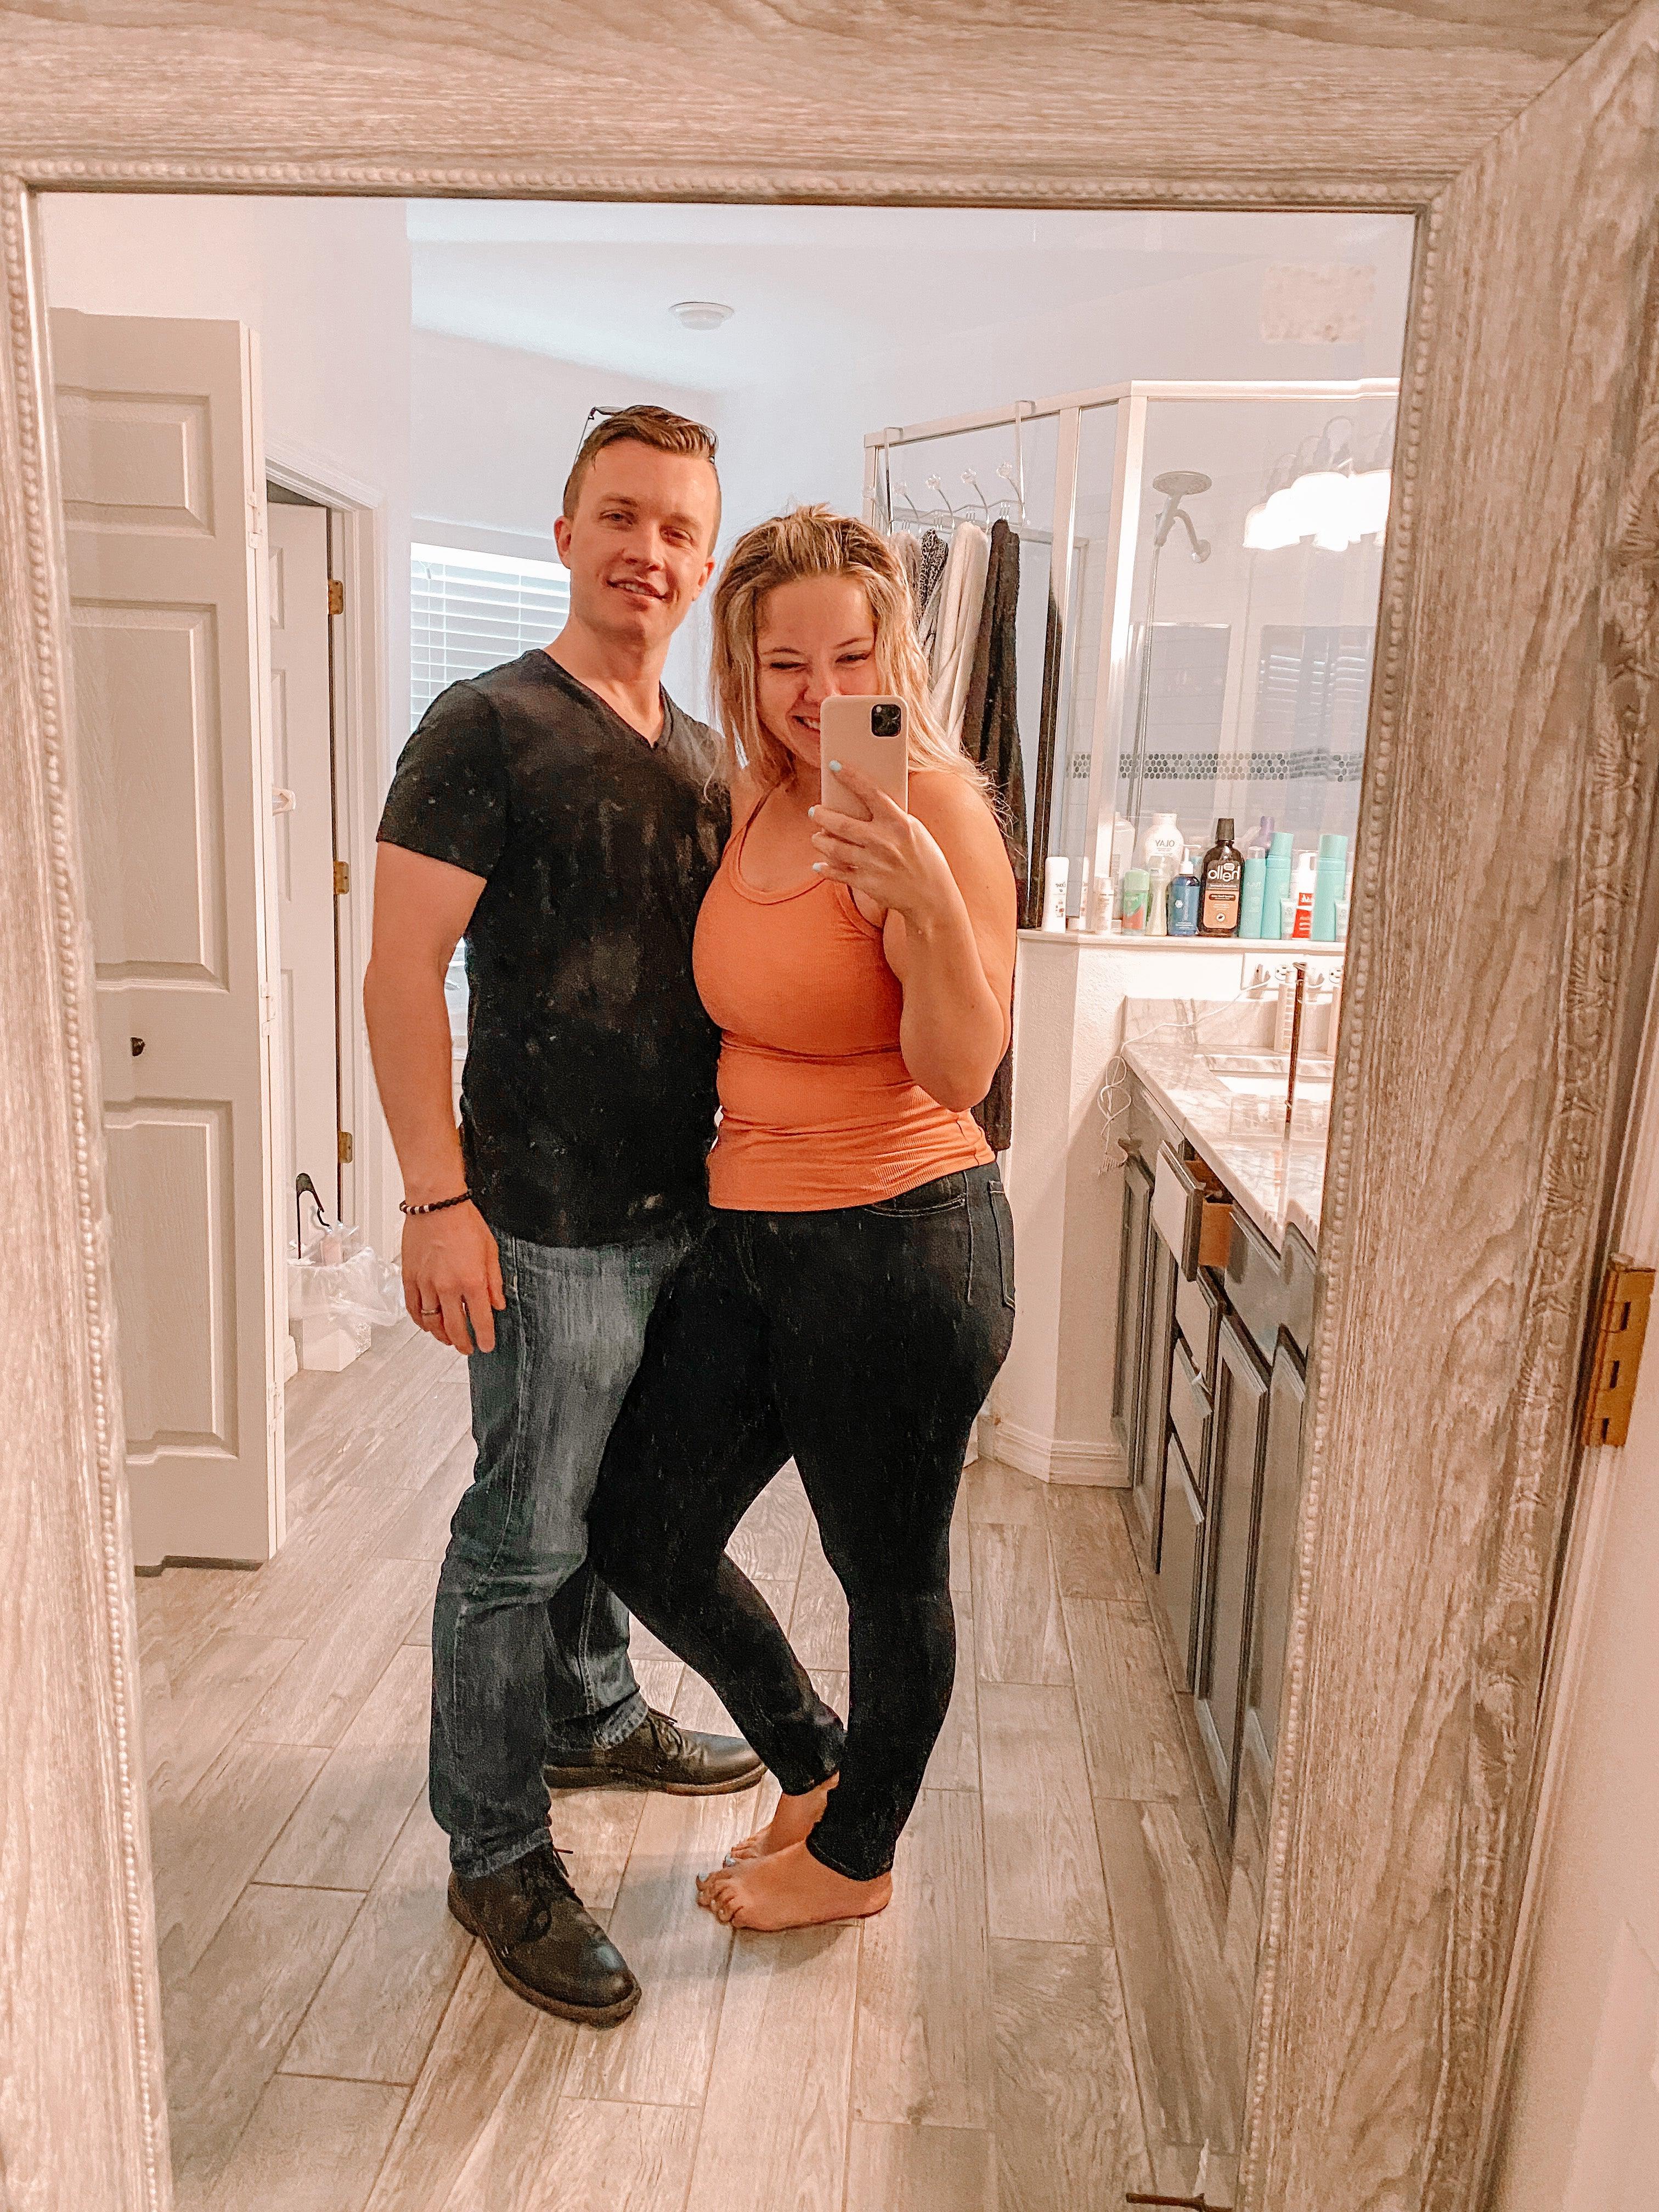 Gaining Weight Postpartum - What Happened to Me - My Adventure to Fit